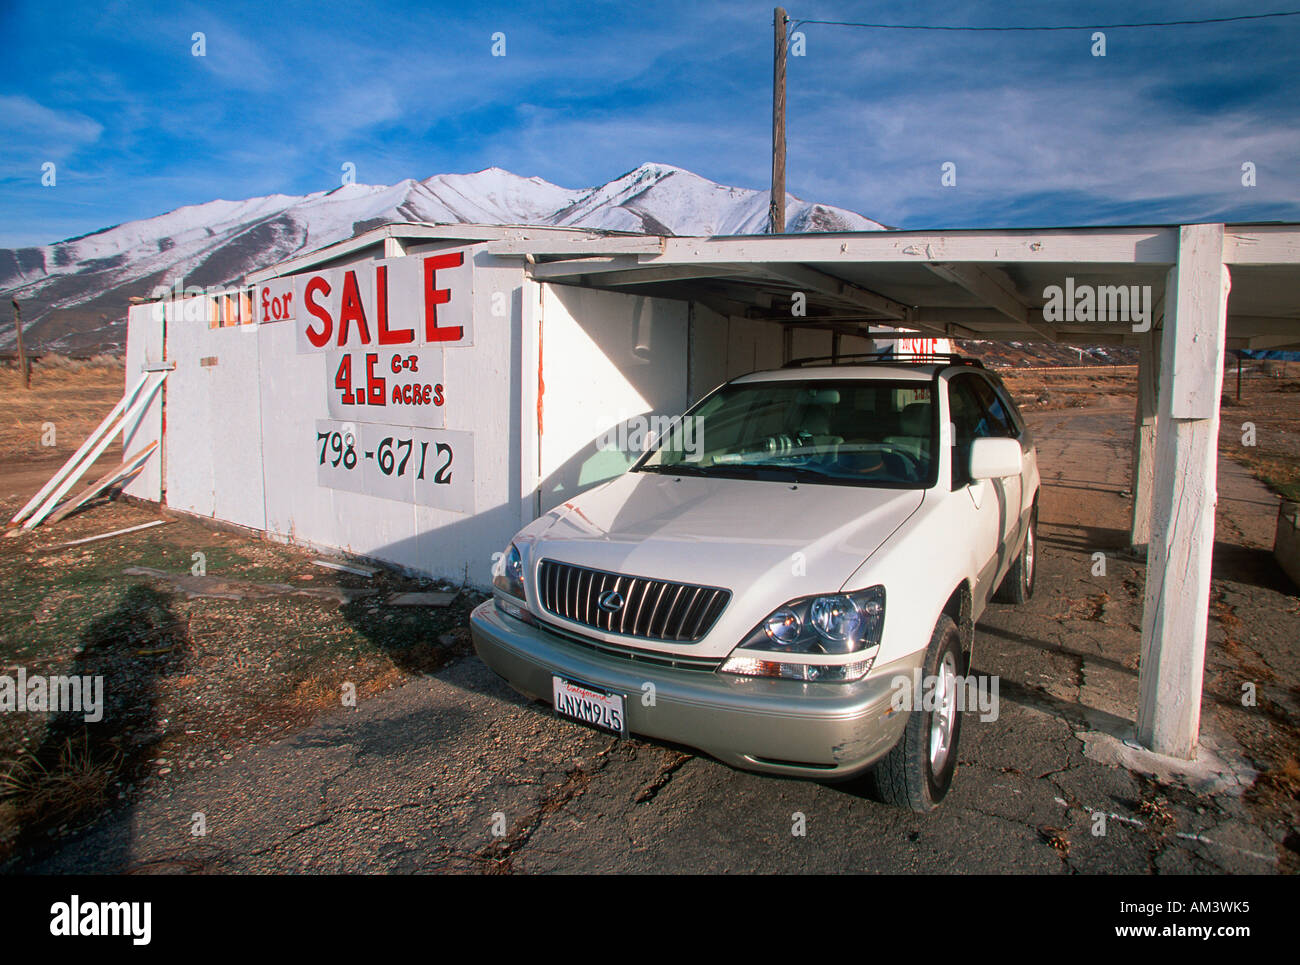 Joe Sohm parking Lexus RX300 under cover of deserted old building in Western states Stock Photo